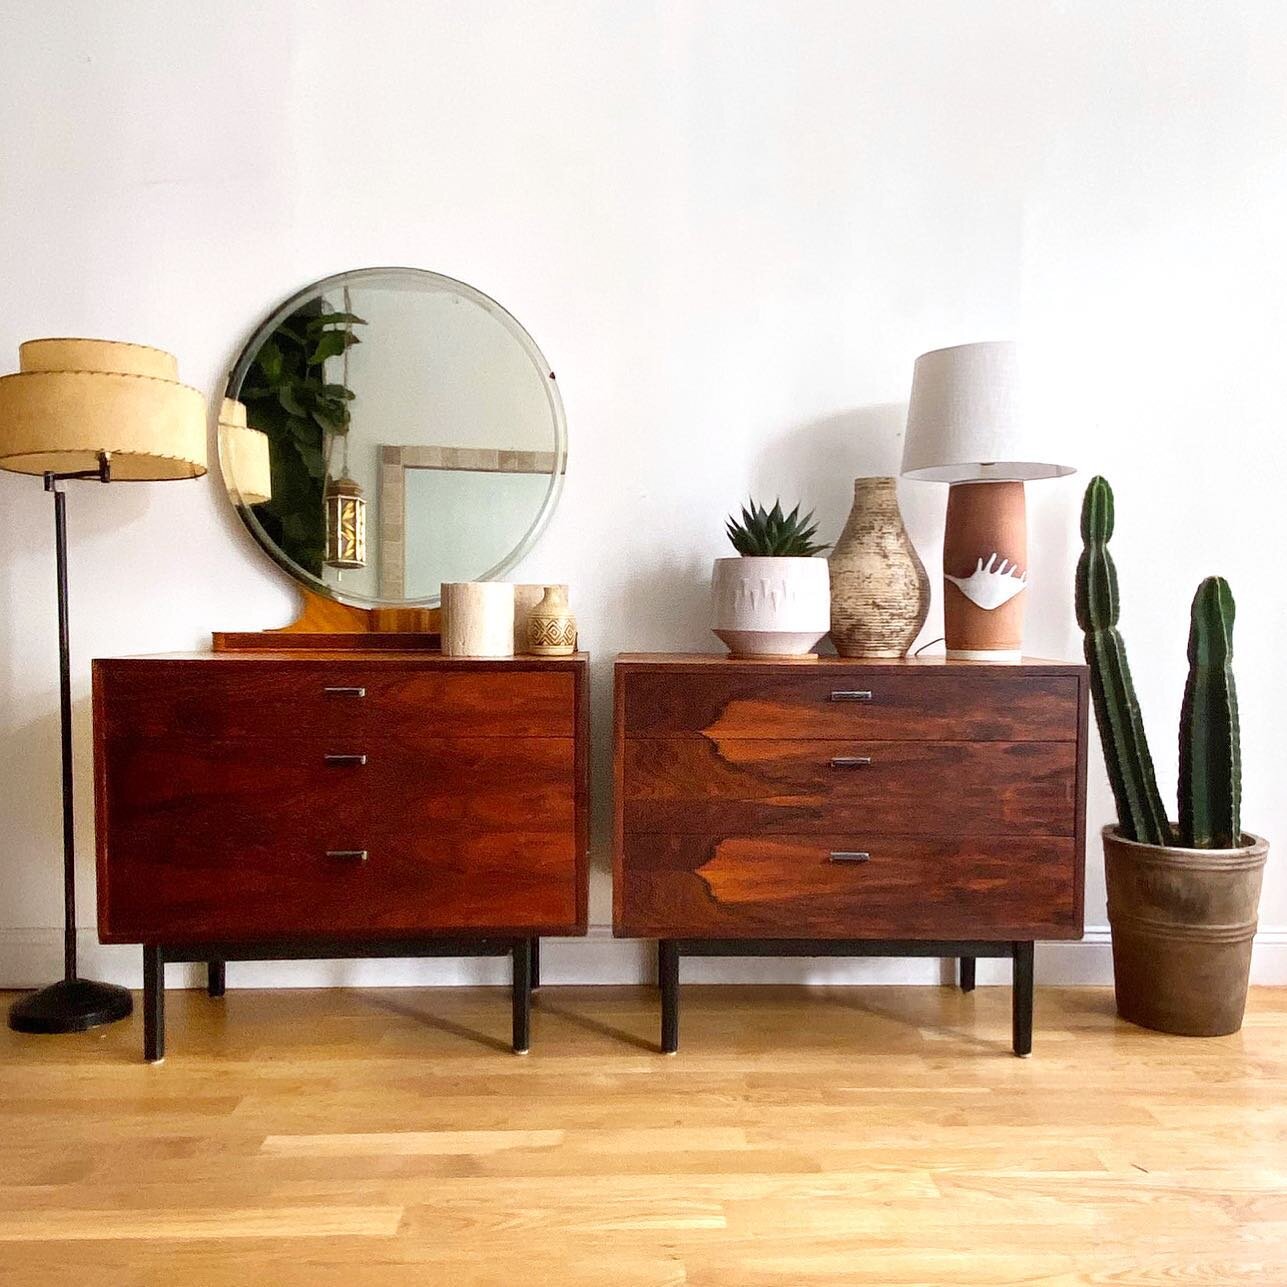 New storage pieces in the shop this week. A stunning pair of rosewood three drawer dressers made by Founders. $700 each. 36W x 18D x 30.25H

Round Deco Mirror SOLD
Midcentury Floor Lamp SOLD
Cactus $250